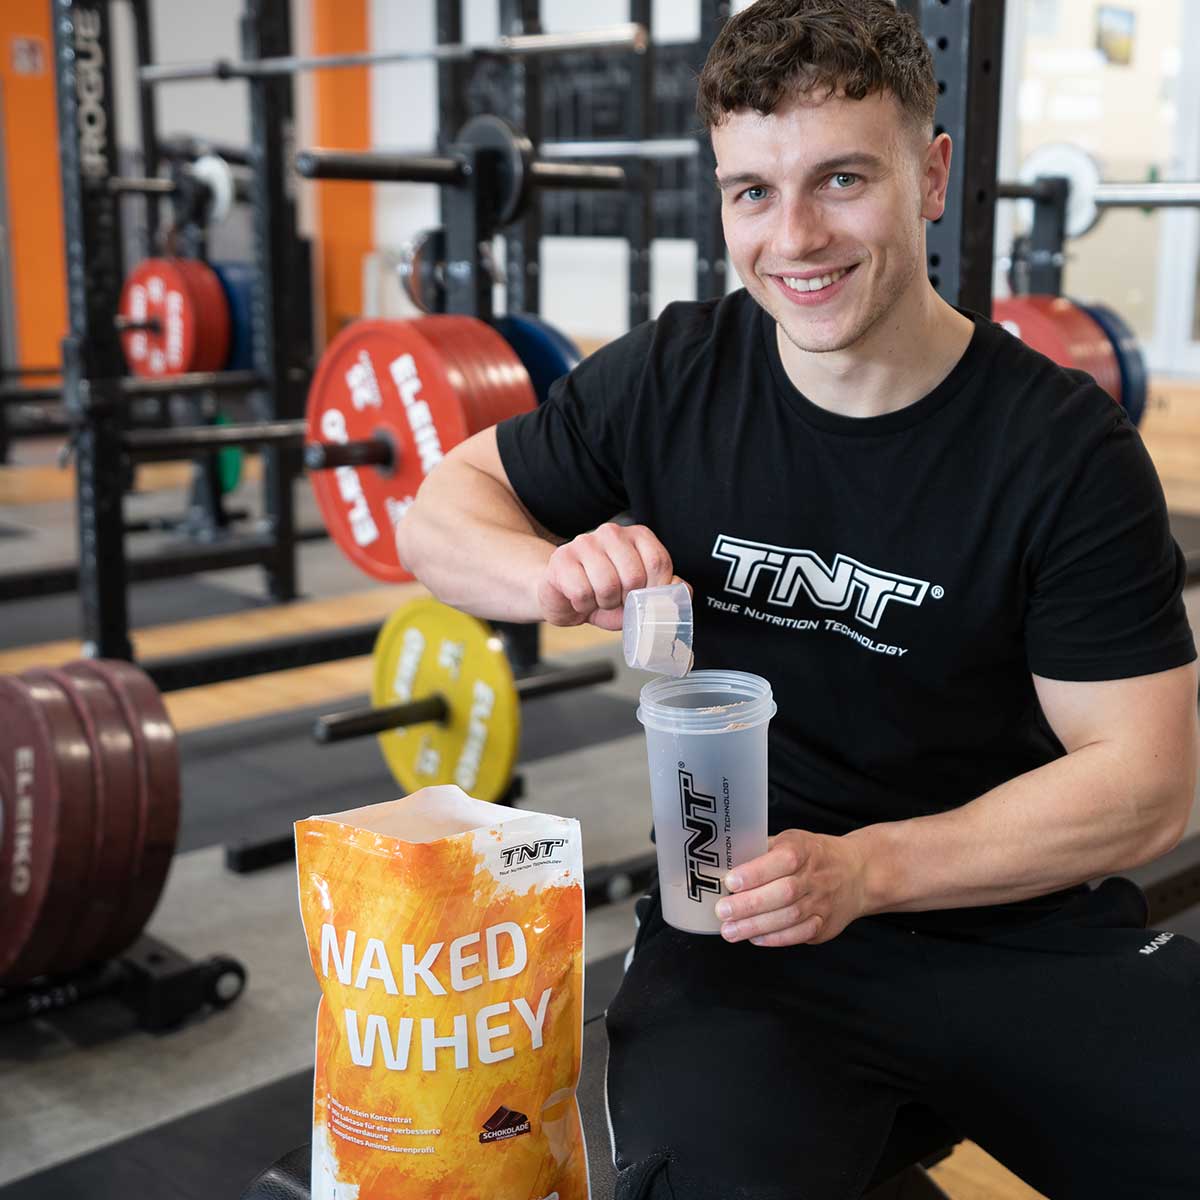 TNT Naked Whey als Post-Workout-Shake